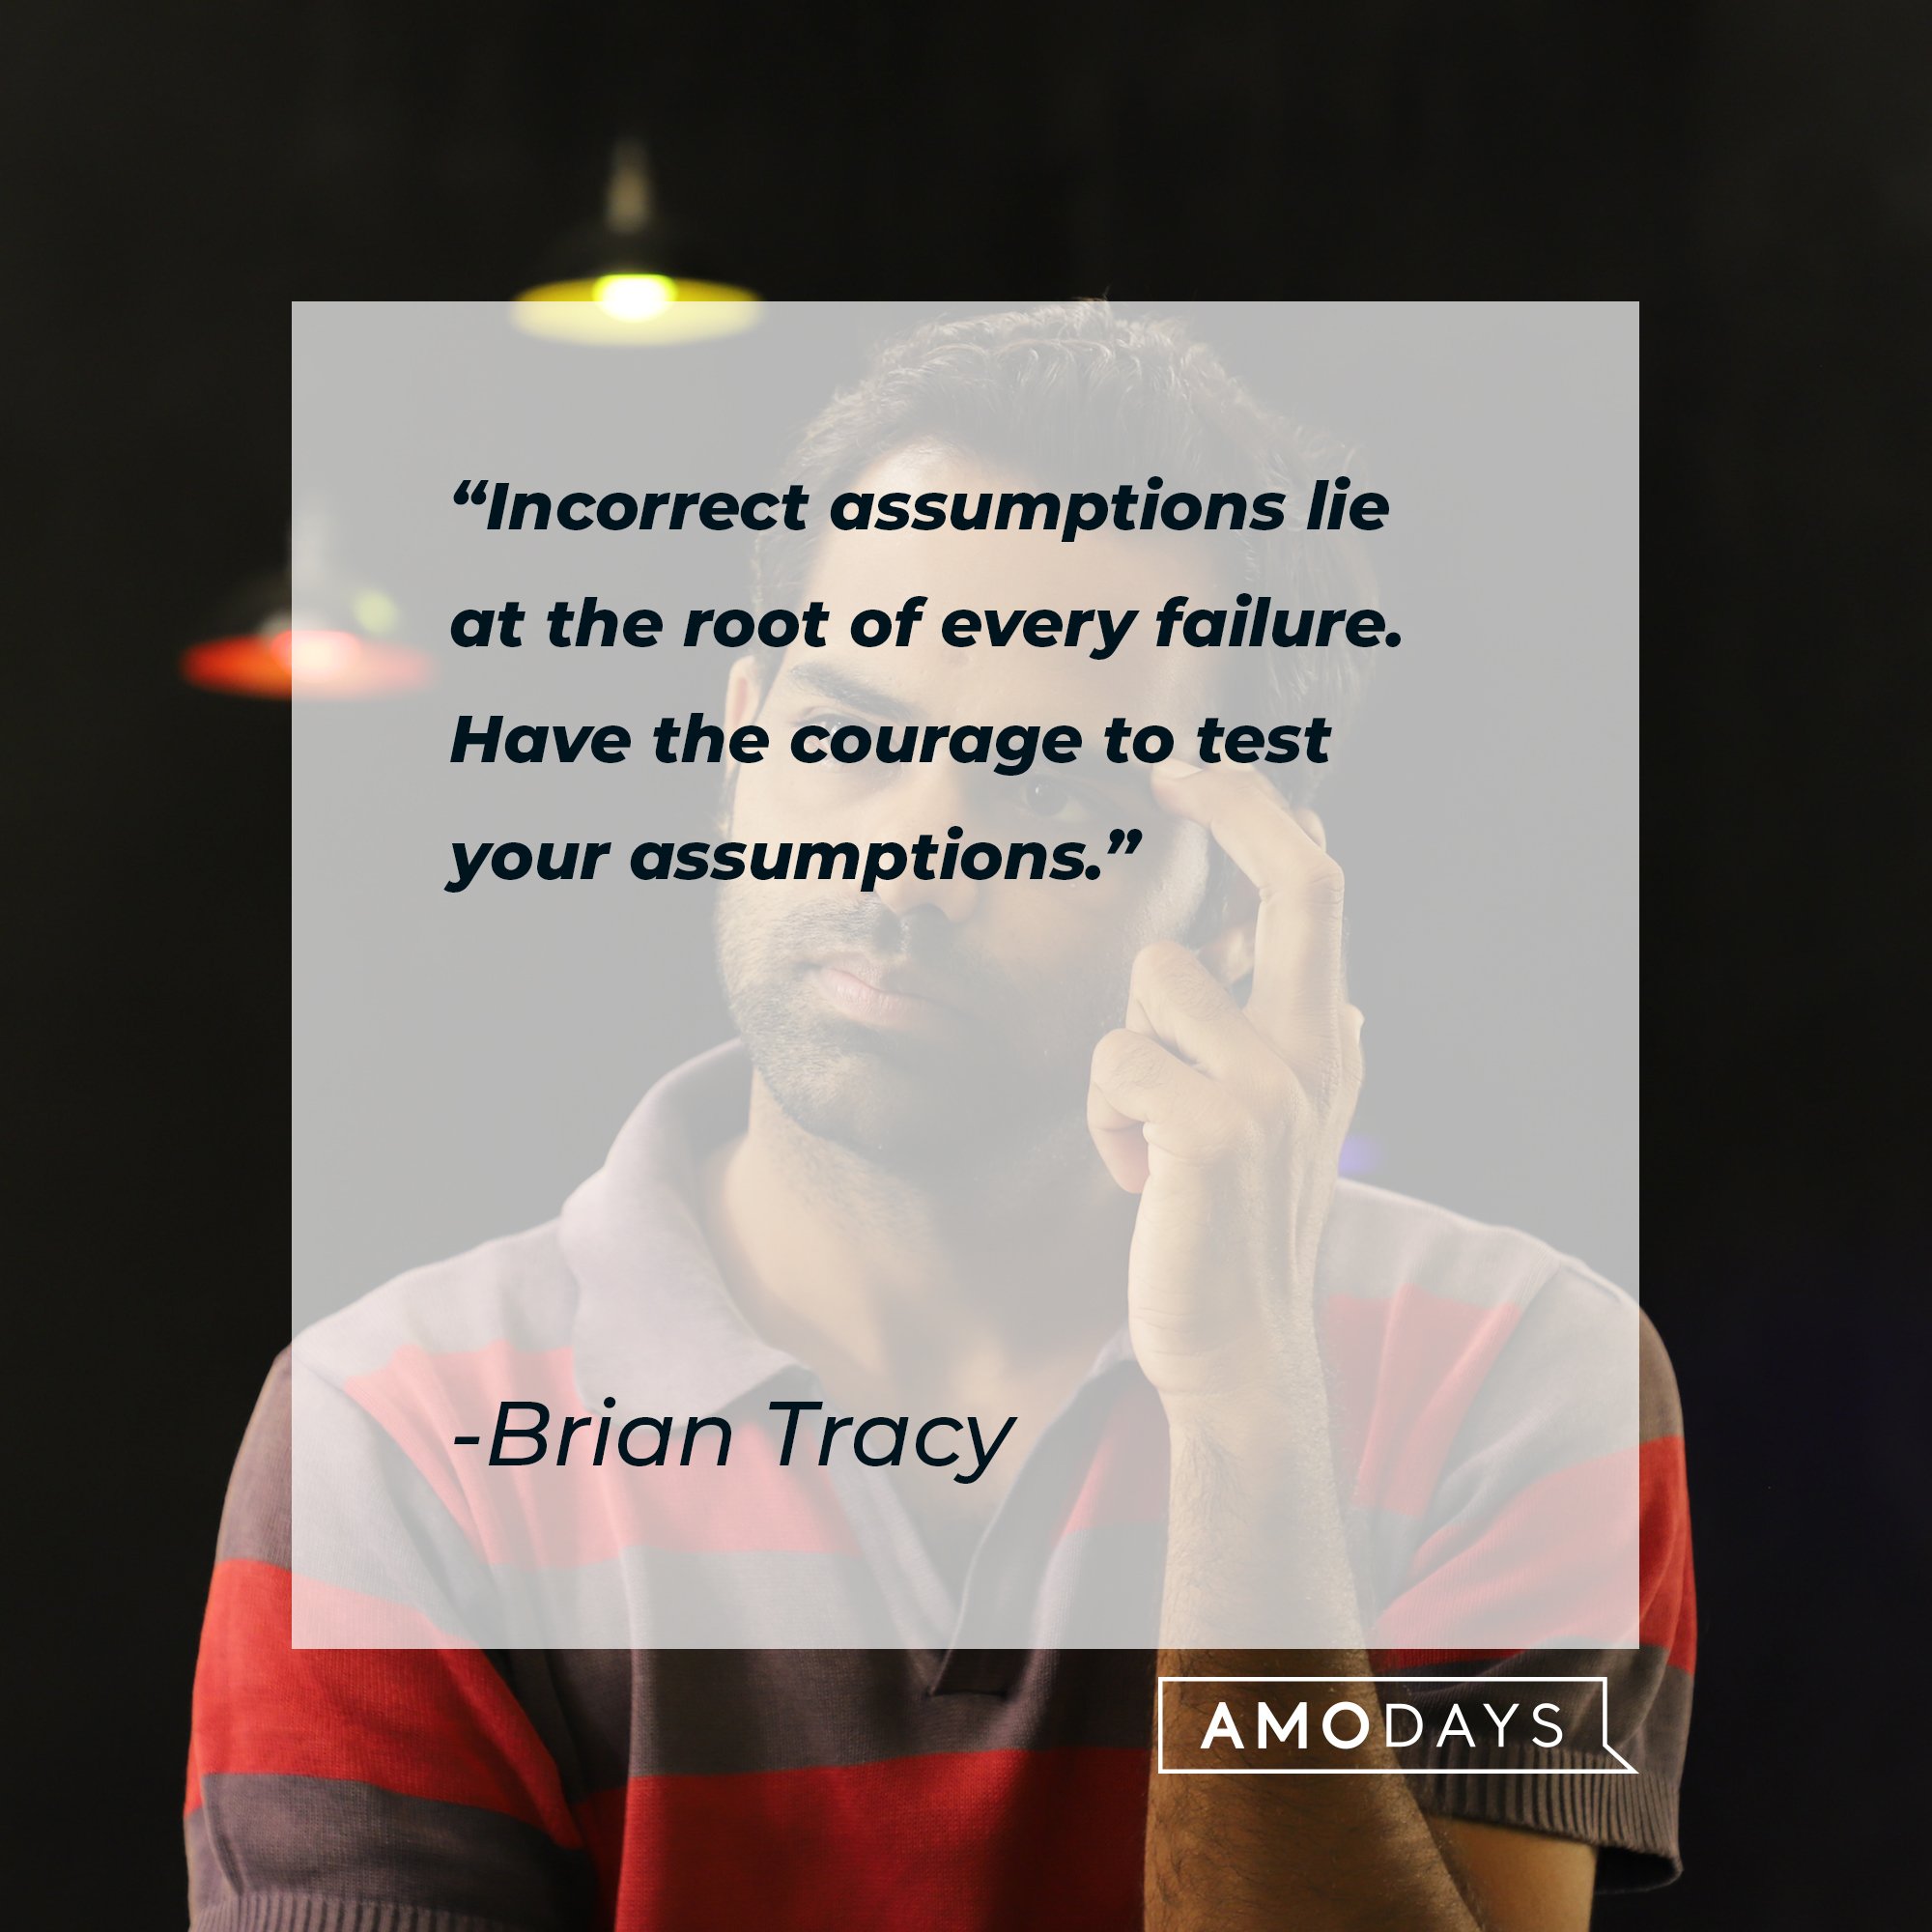 Brian Tracy’s quote: "Incorrect assumptions lie at the root of every failure. Have the courage to test your assumptions." | Image: AmoDays 